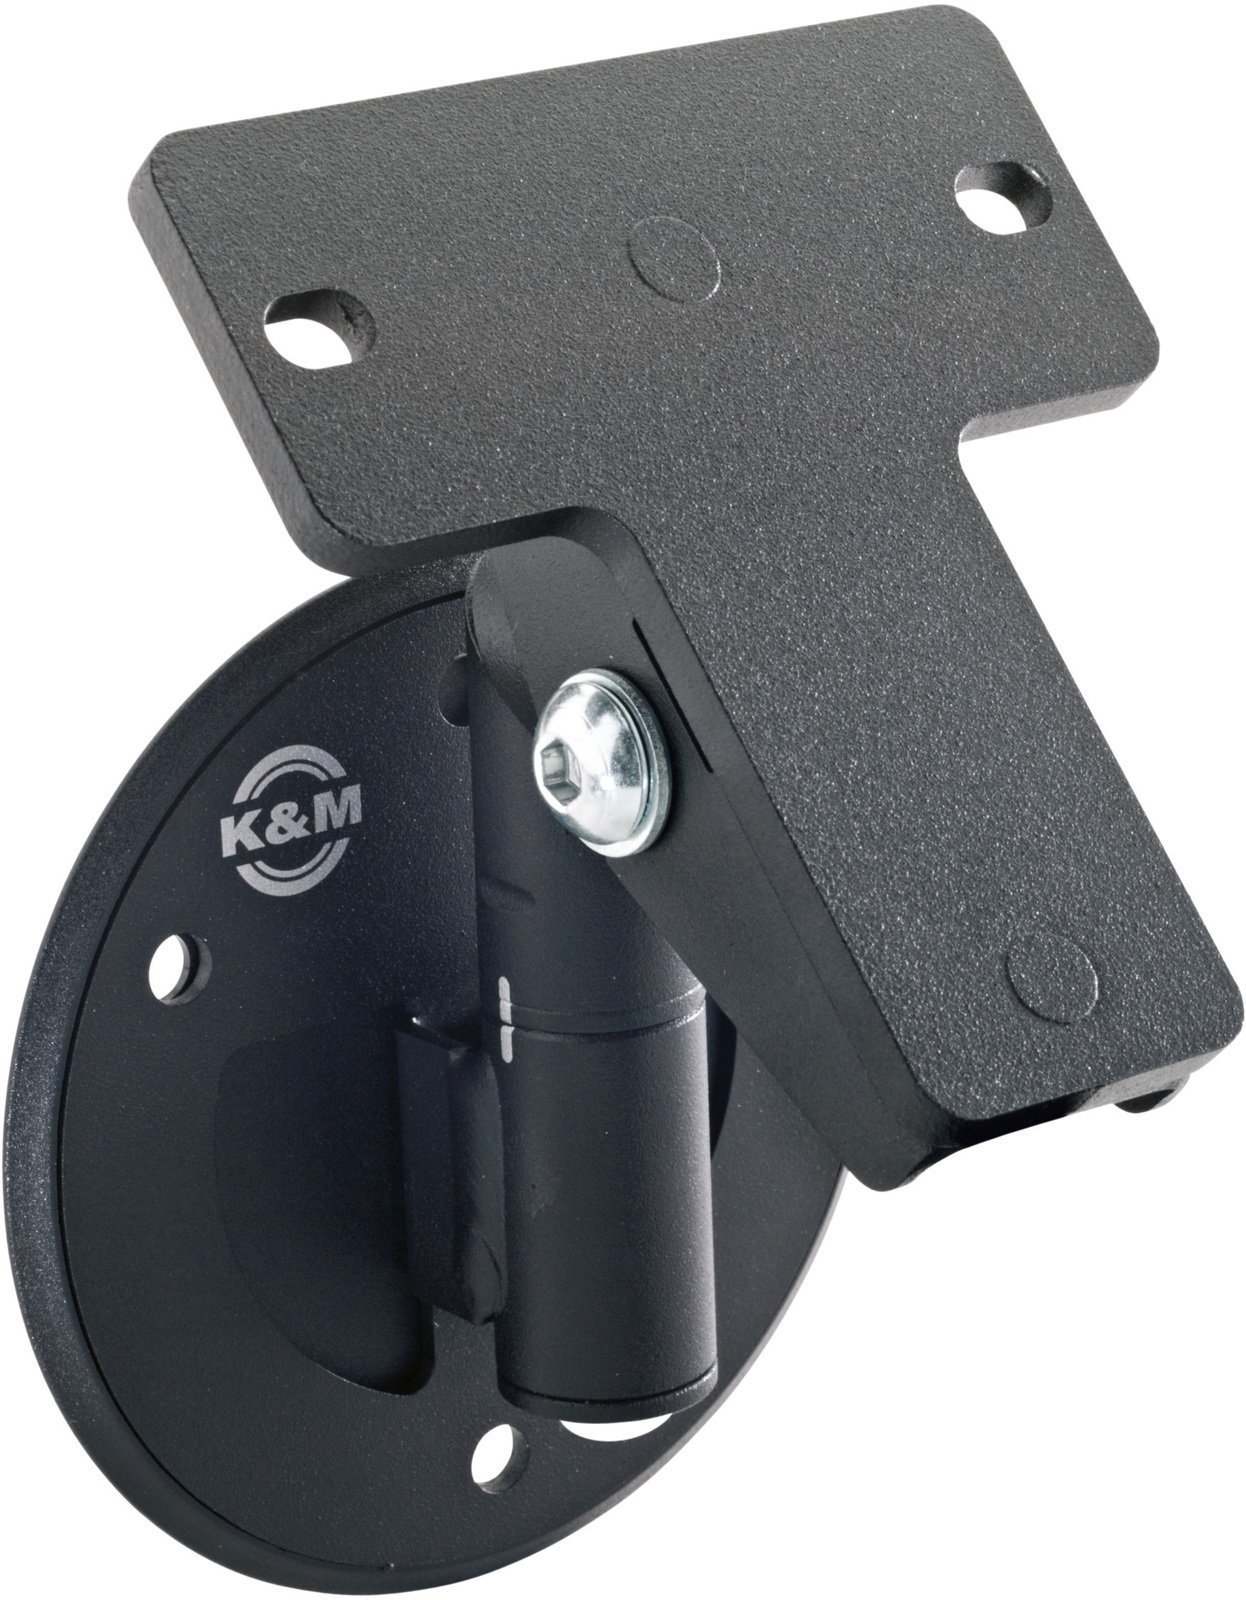 Wall mount for speakerboxes Konig & Meyer 24161 Wall mount for speakerboxes